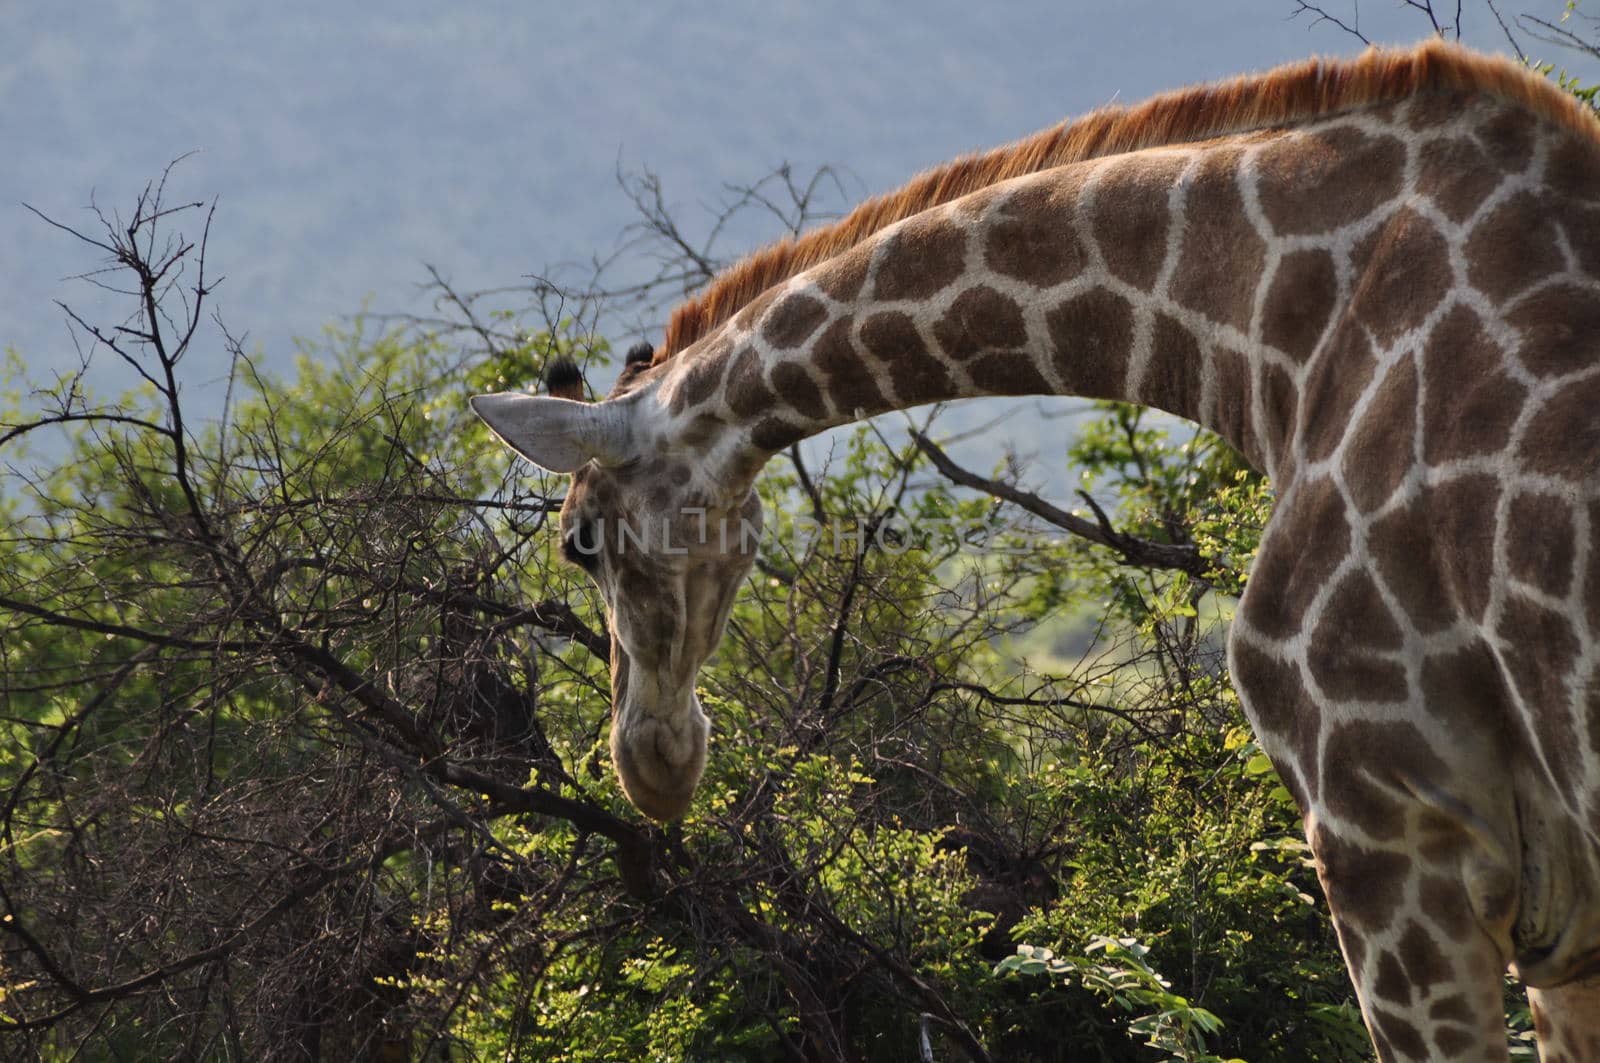 Giraffe eating branches with trees and mountains in the background